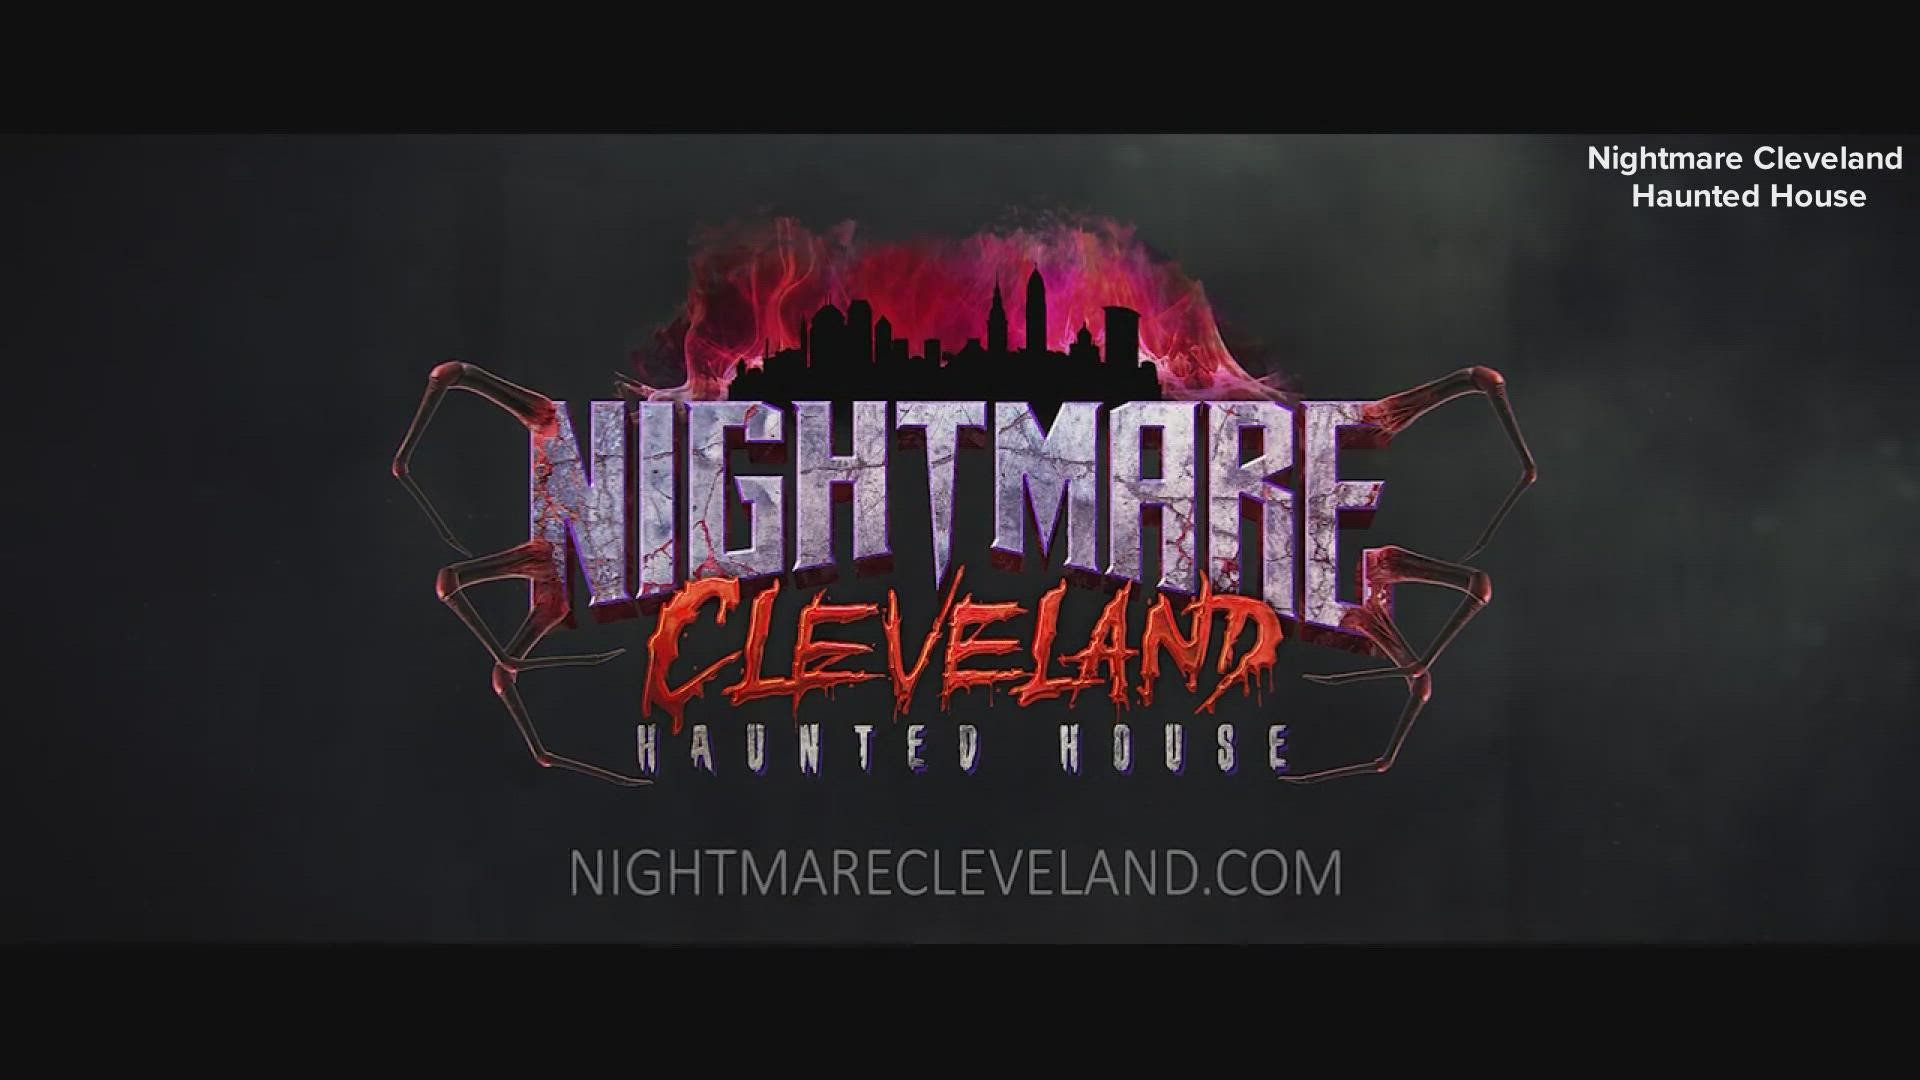 Nightmare Cleveland is the brainchild of Vaughn Lekan, who also owns and operates the Chippewa Lake Slaughterhouse in Medina County.